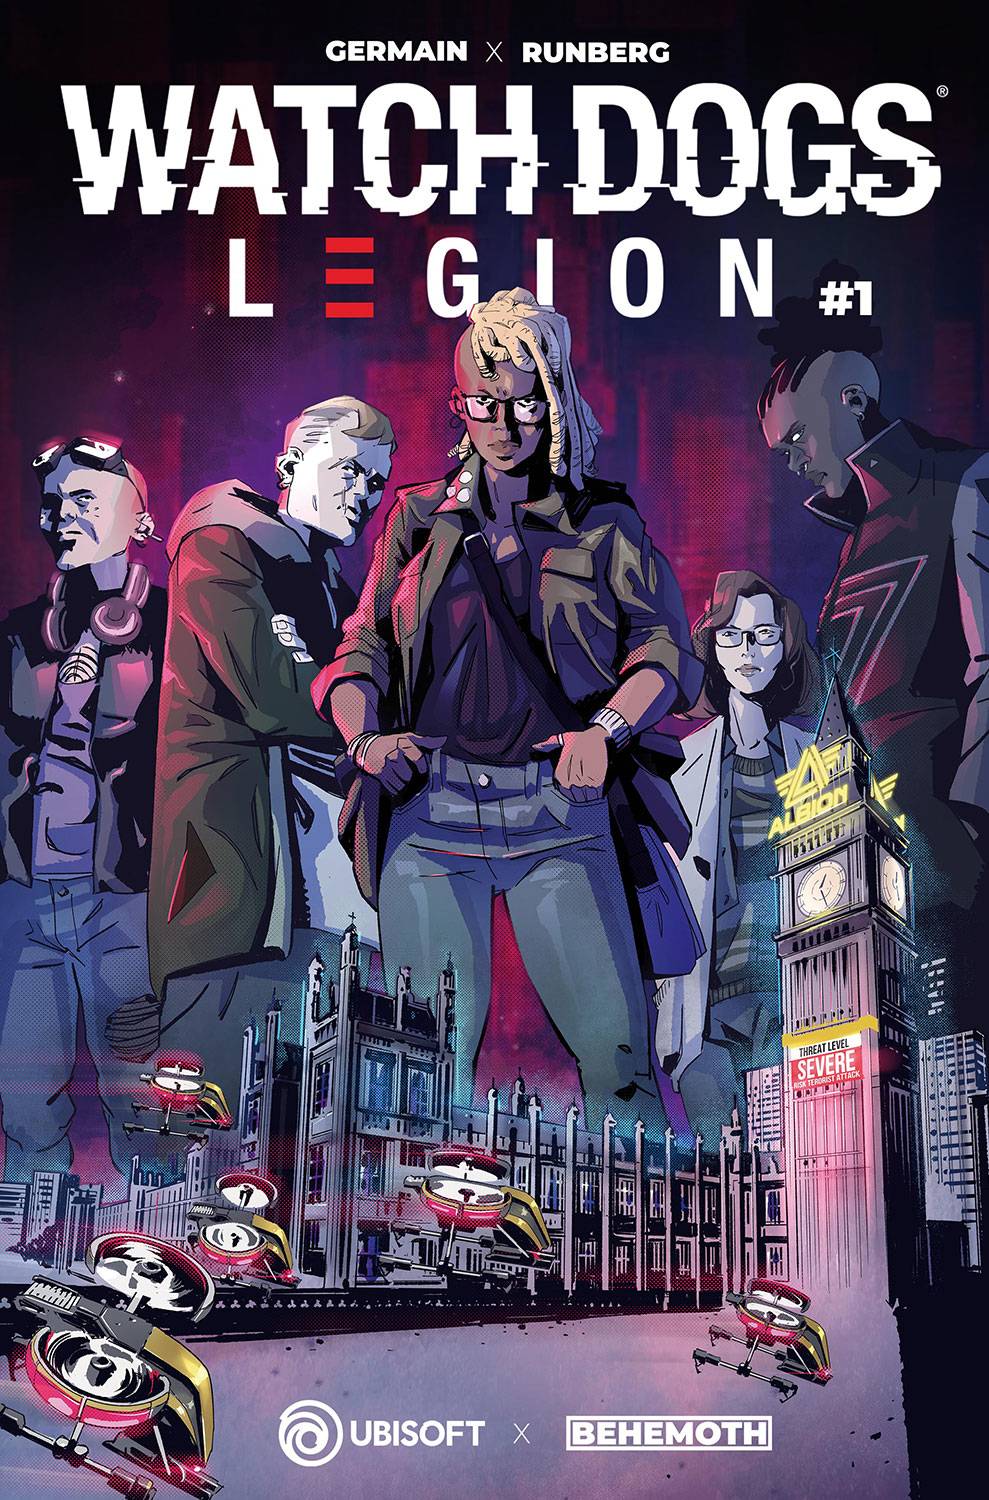 Watch Dogs Legion #1 (of 4) (Cover A - Massaggia)